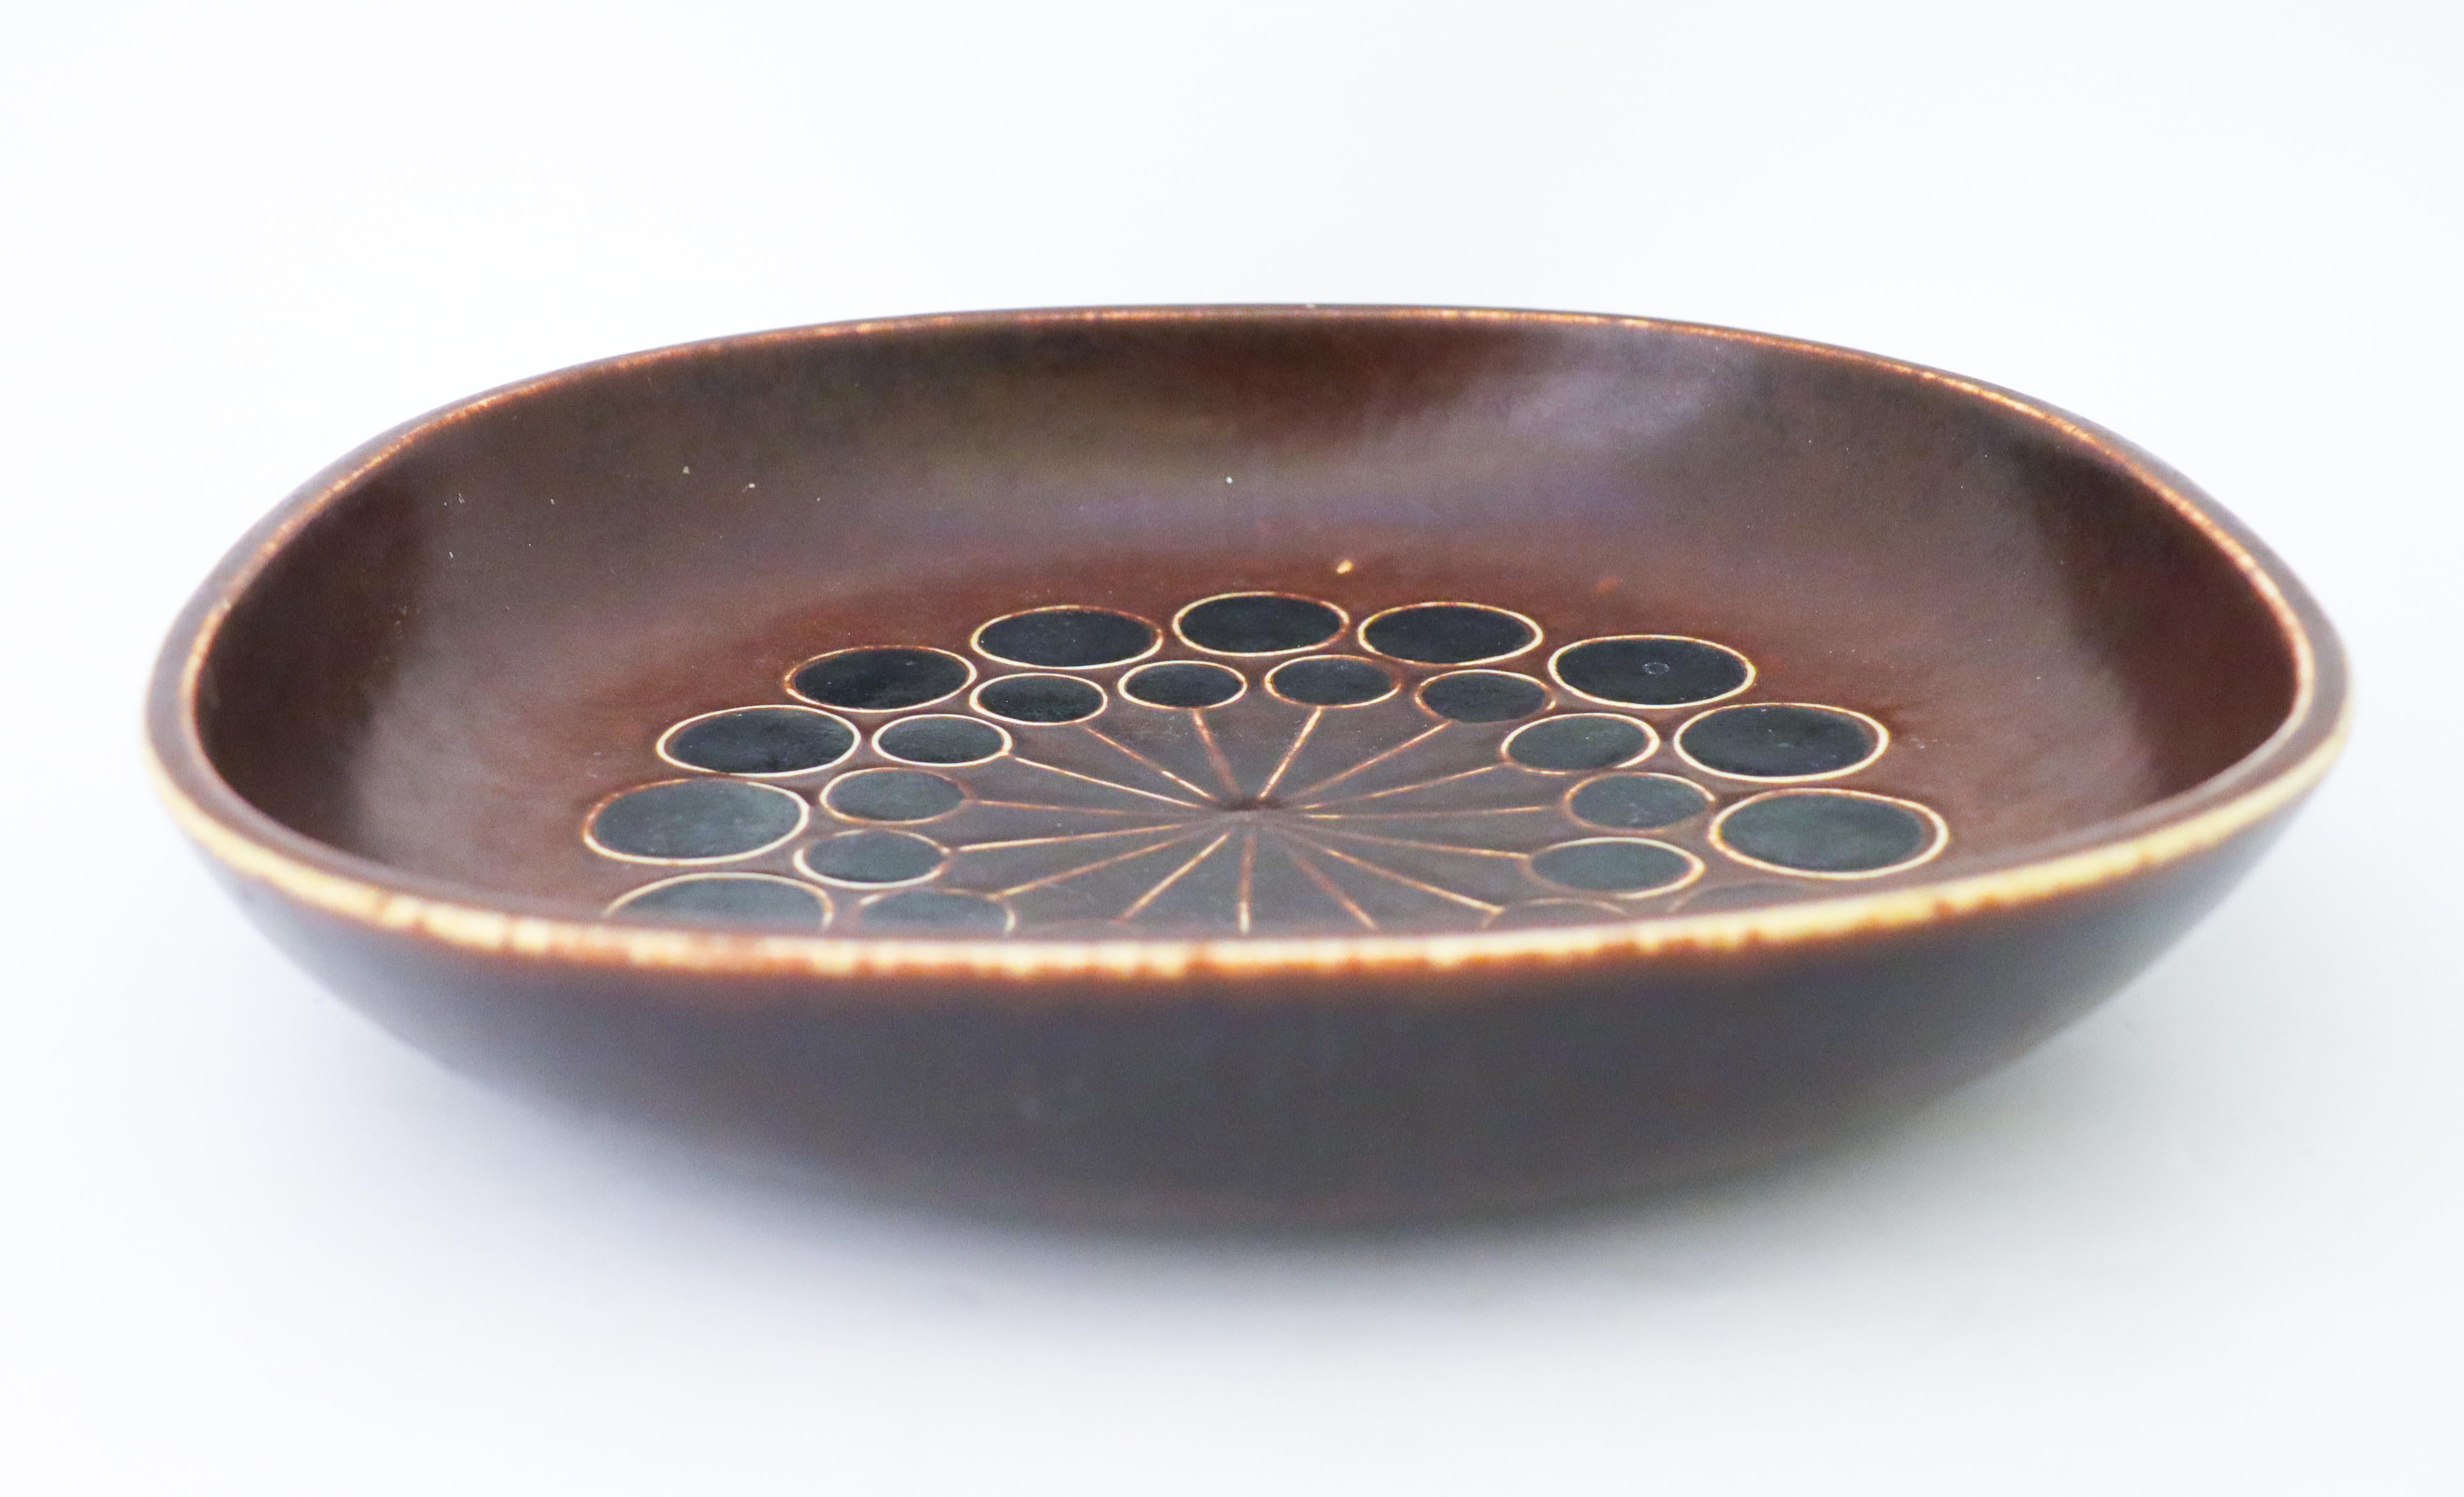 A squared bowl designed by Hertha Bengtson at Rörstrand, the bowl is 29,5 x 29,5 cm (11.8